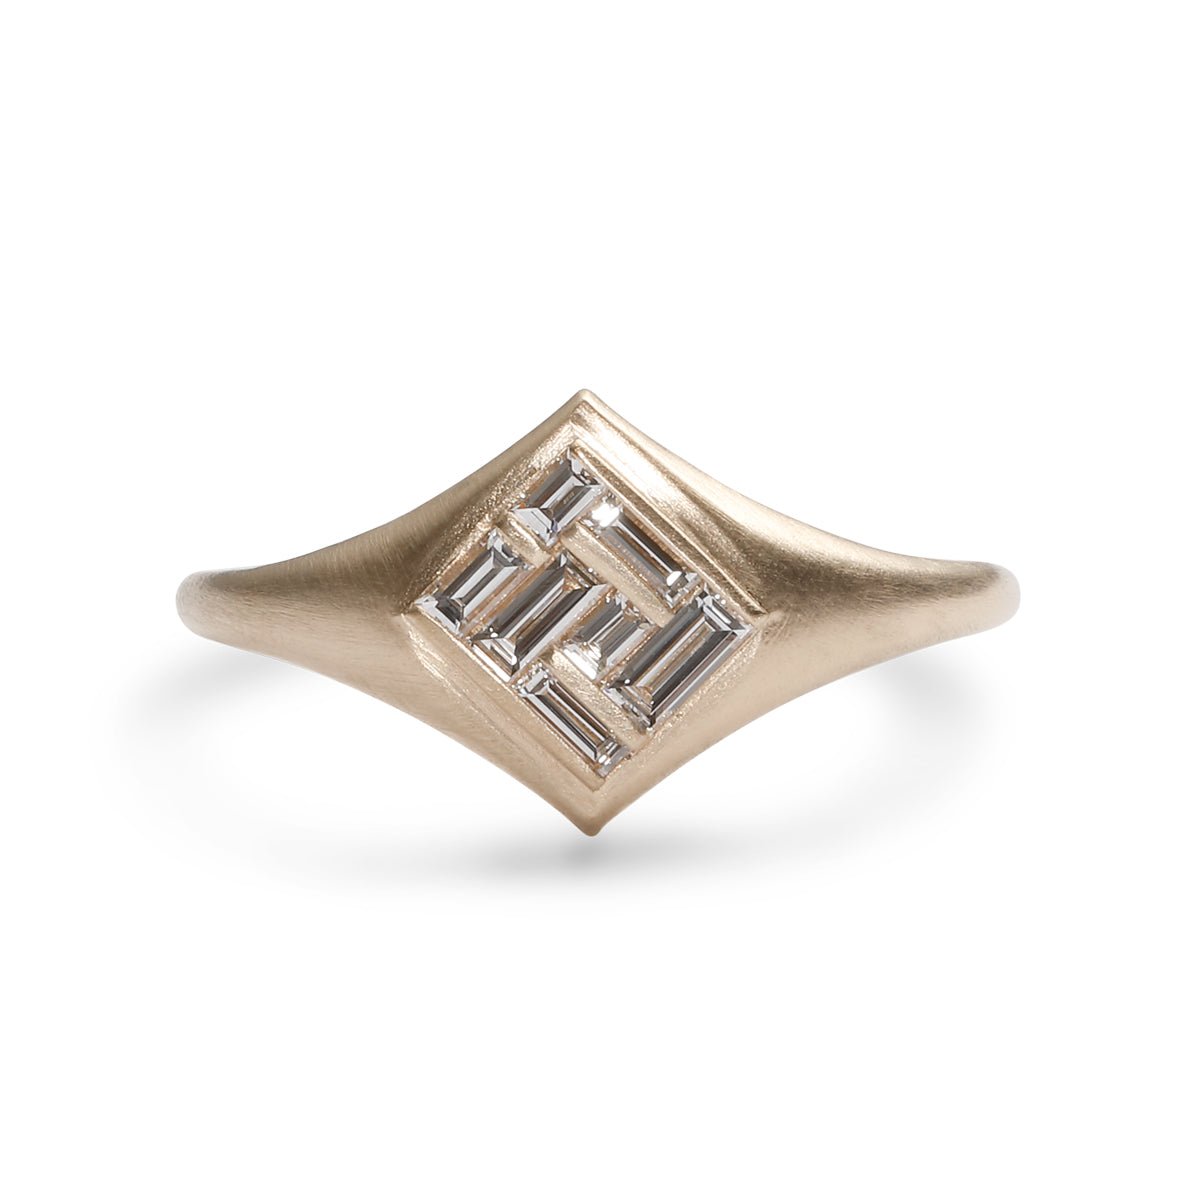 Elicio ring featuring channel-set lab-grown diamonds in a 14K gold band. Designed and handcrafted in Portland, Oregon.